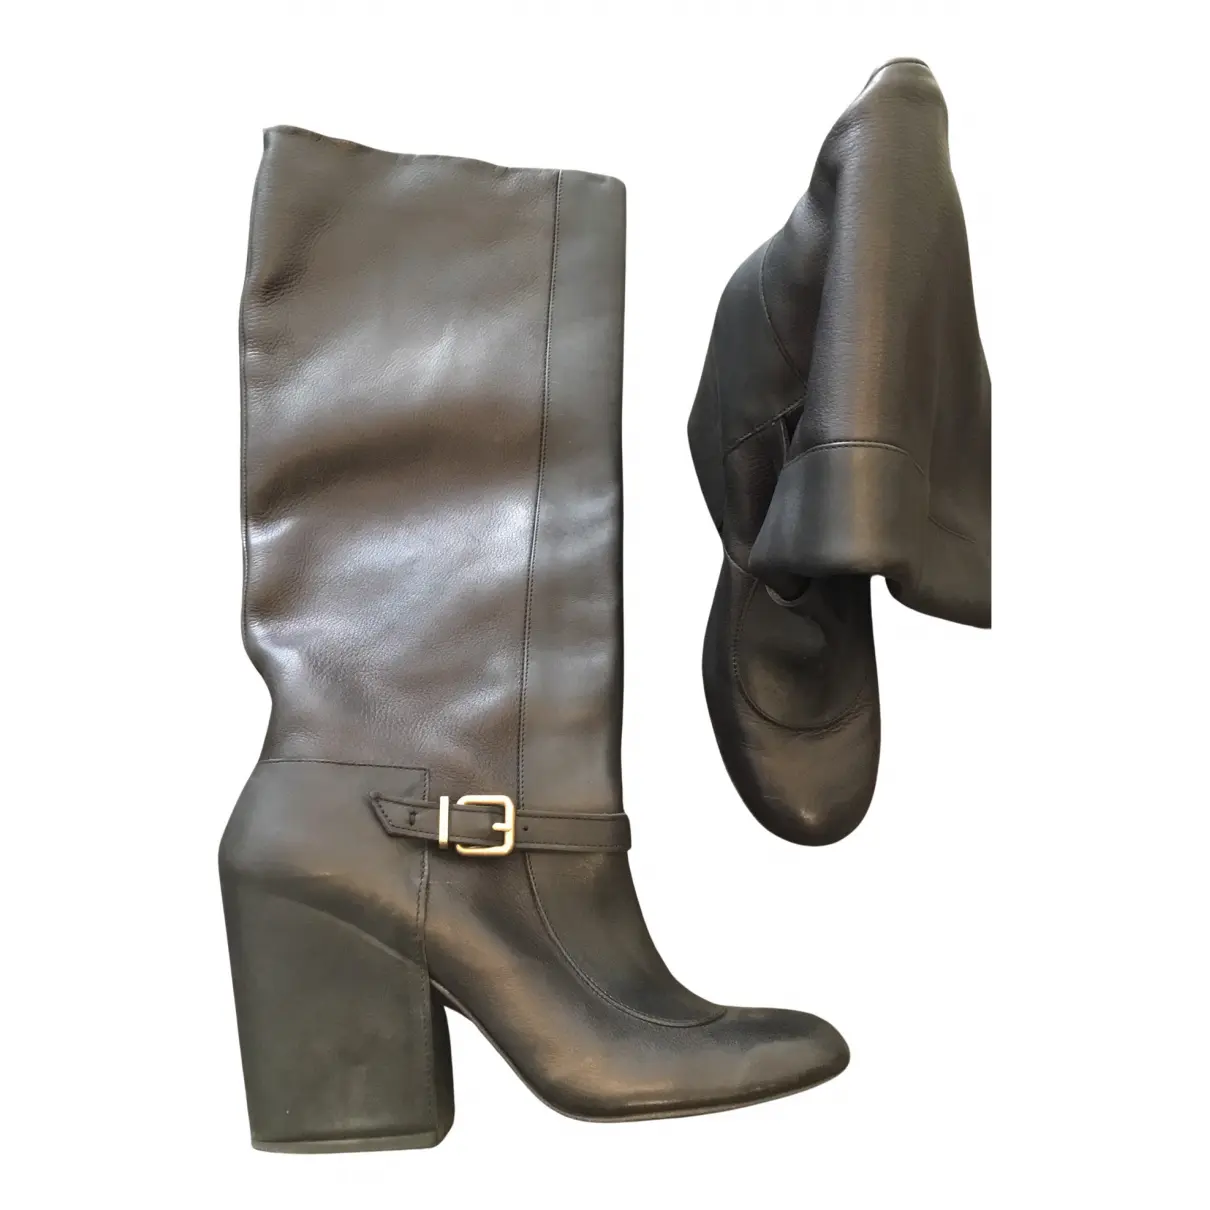 Leather riding boots Robert Clergerie